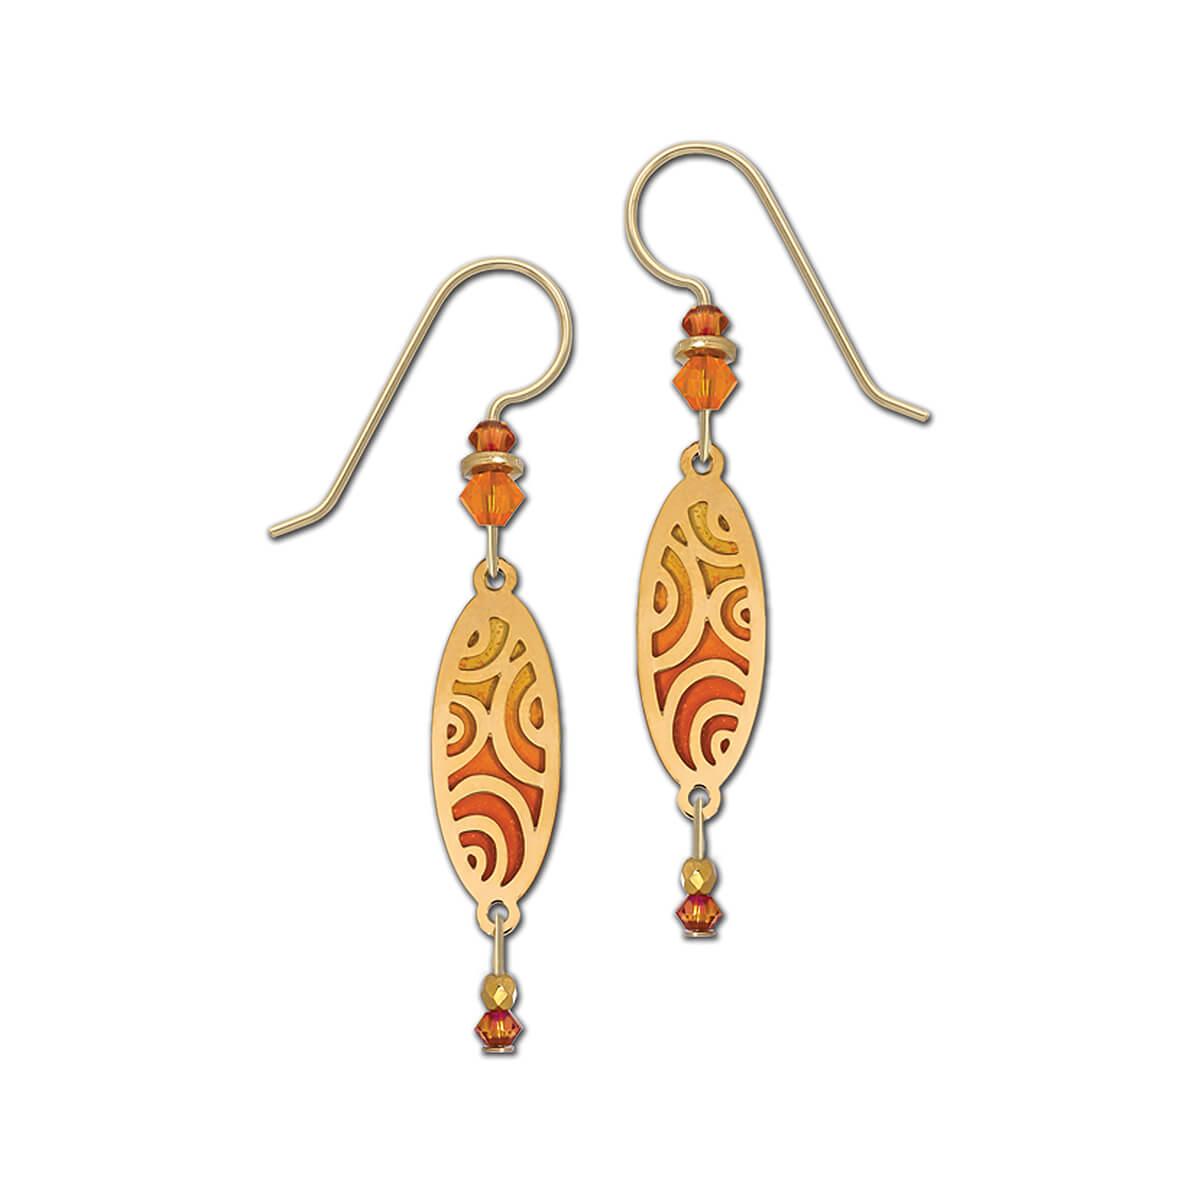  Orange Oval With Shiny Gold Plated Circles Overlay And Beads Earrings